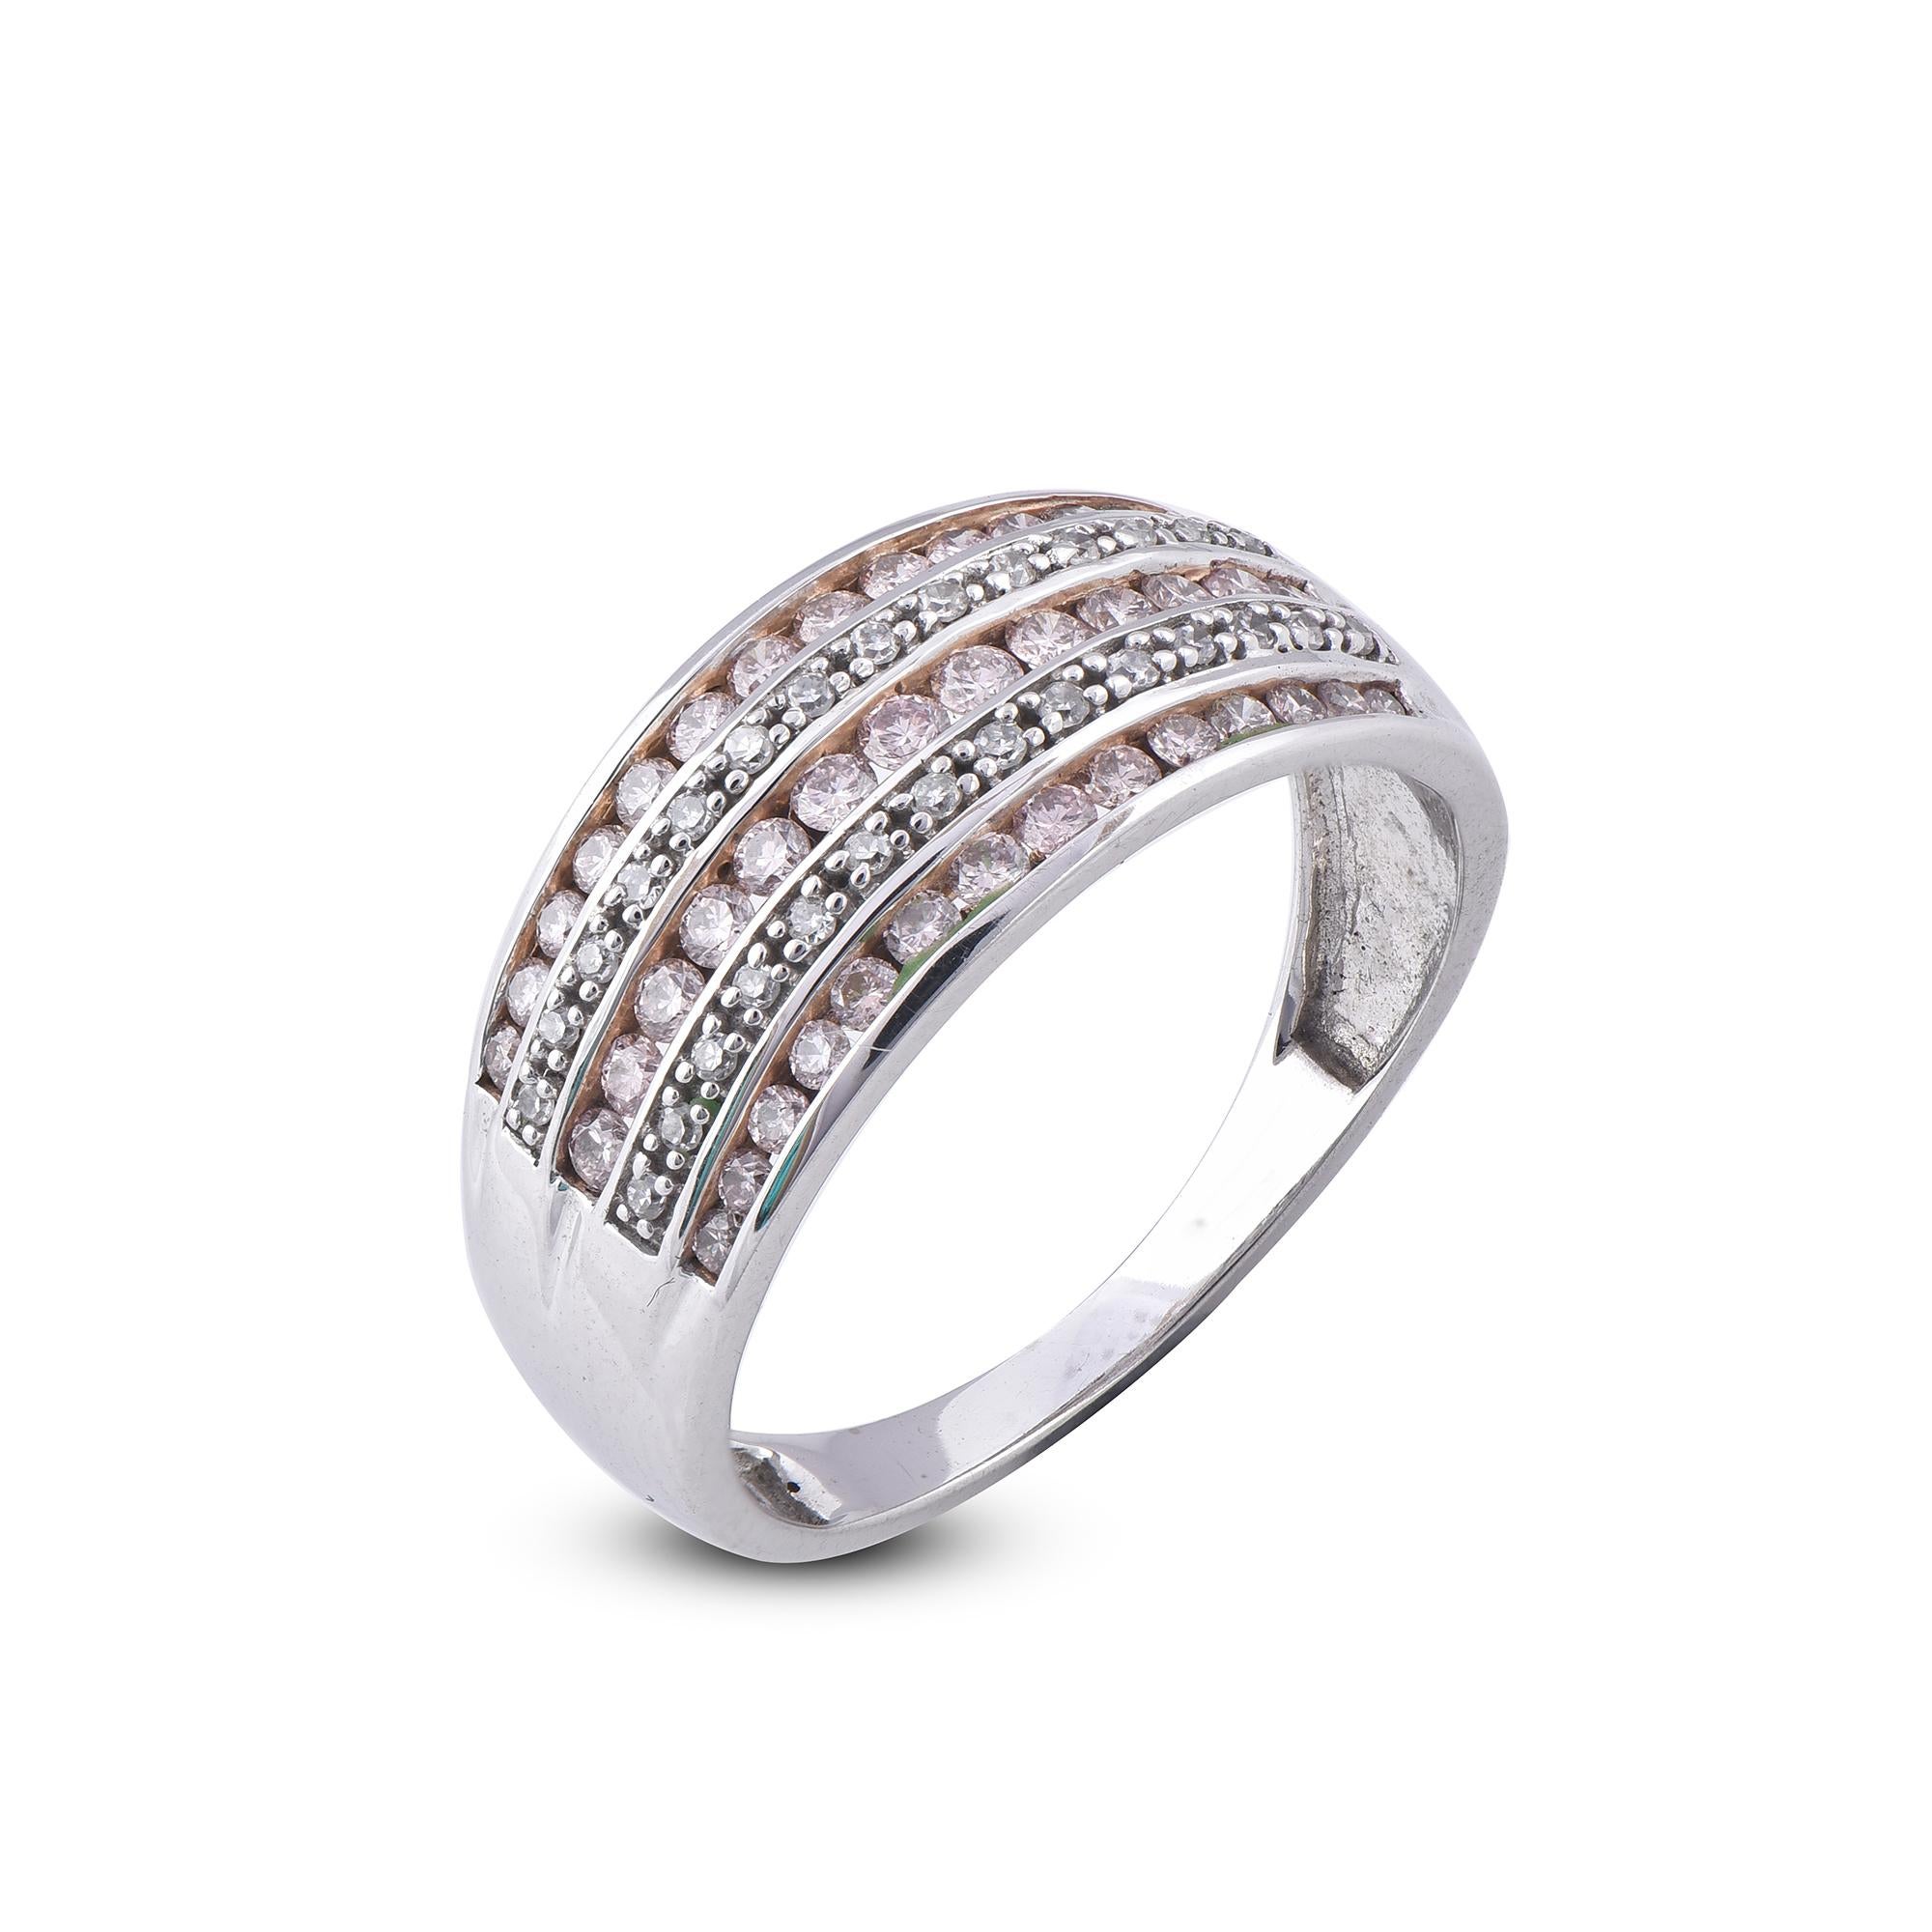 This Multi row Wedding Band is expertly crafted in 18 Karat White Gold and features 28 Round and 41 pink diamonds set in pave and channel setting, shines in H-I color I1 clarity in a beautiful design. This ring has high polish finish and is a